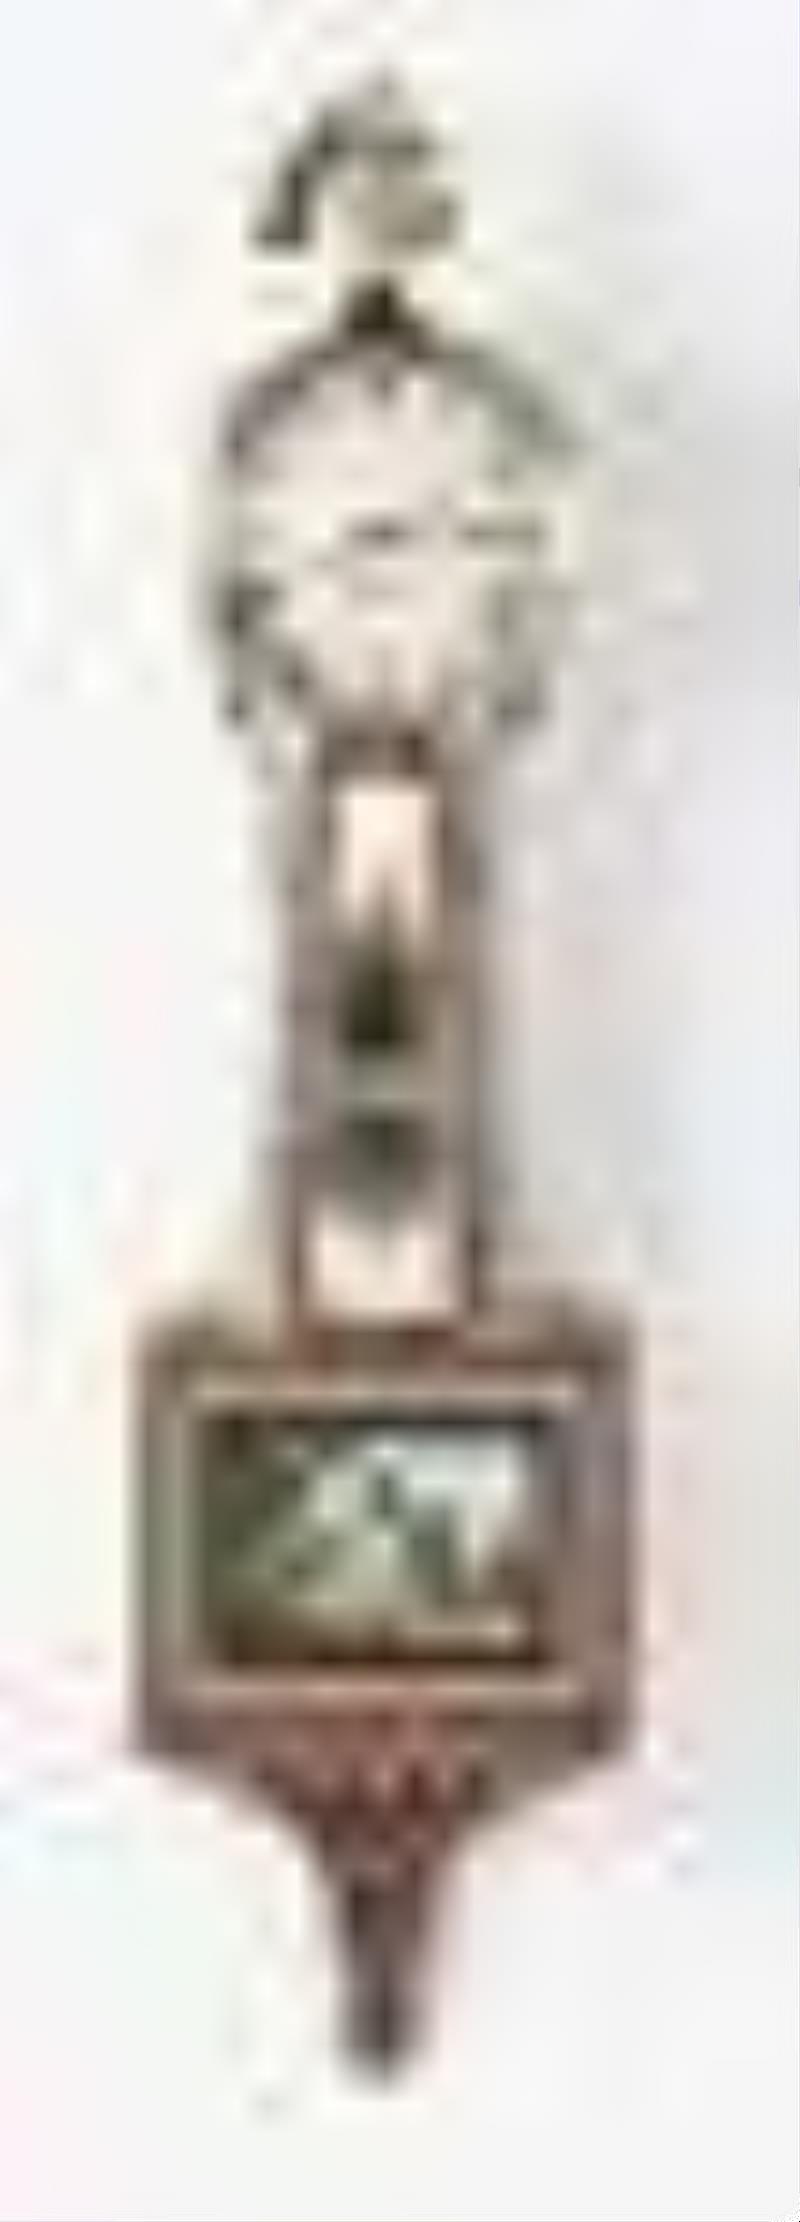 Foster Campos patent timepiece or banjo clock